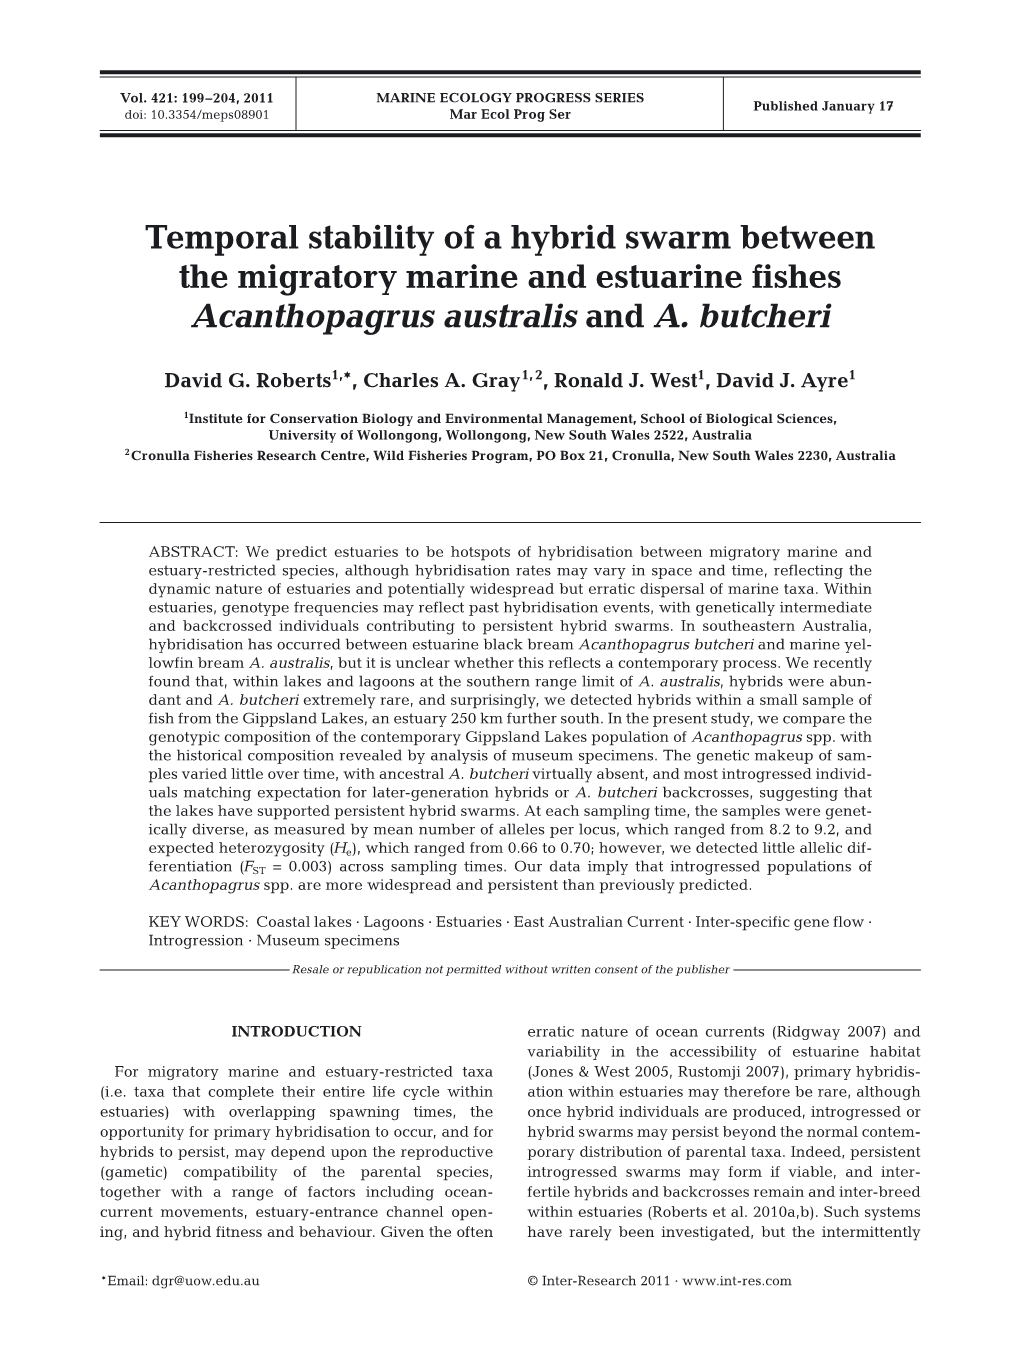 Temporal Stability of a Hybrid Swarm Between the Migratory Marine and Estuarine Fishes Acanthopagrus Australis and A